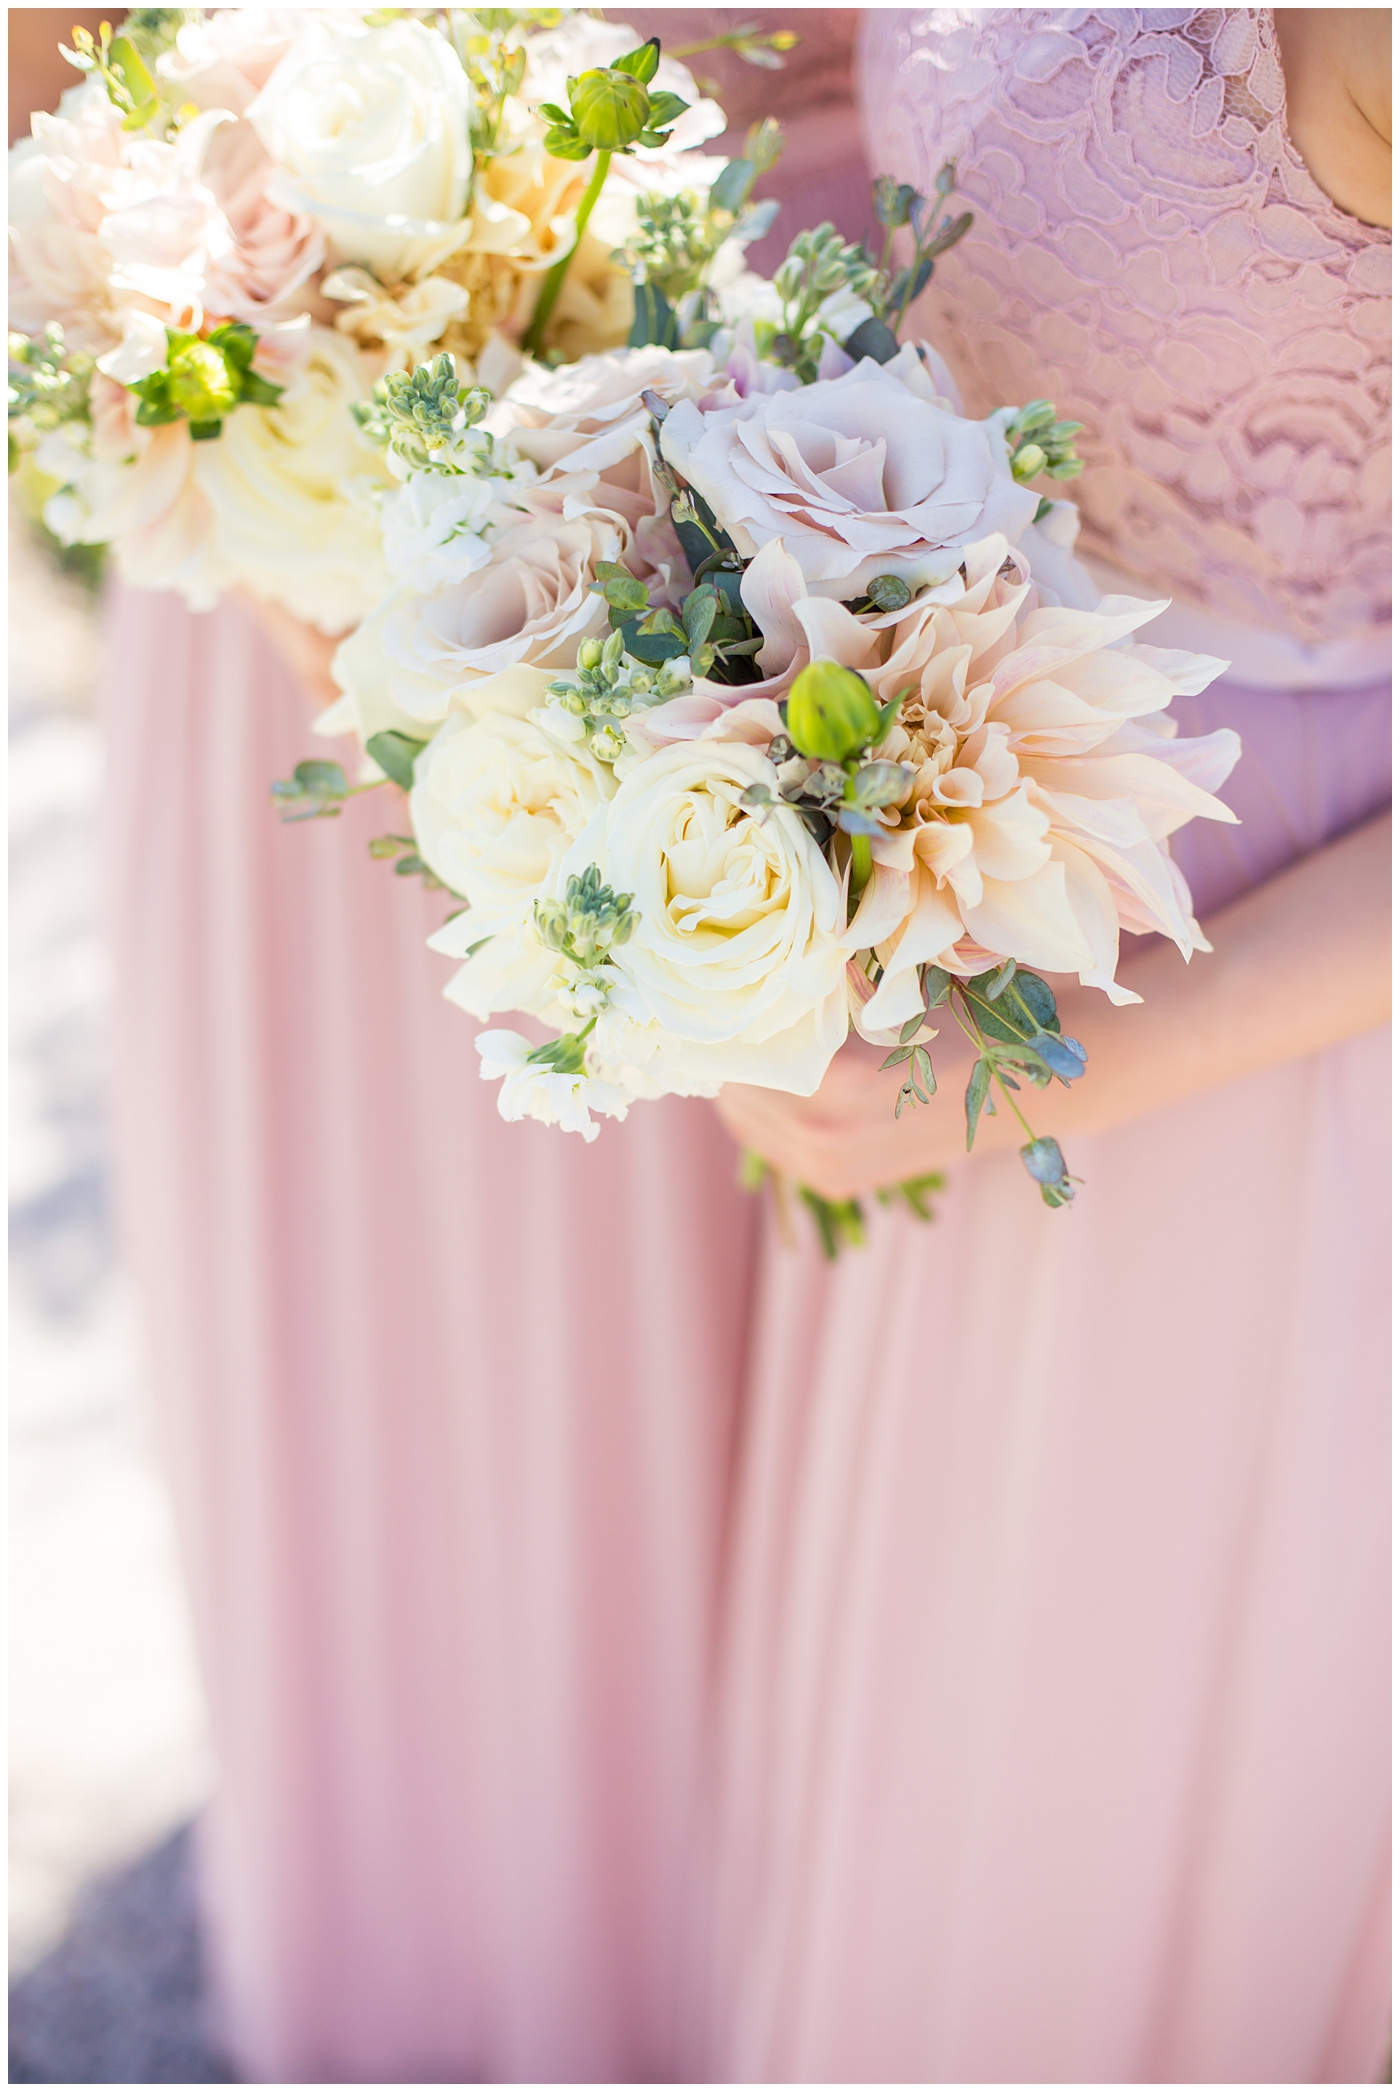 bride in wtoo watters wedding dress with lace straps with wildflower bridal bouquet with soft pink, blush, white, greenery flowers including roses, dahlias, snapdragons with bridesmaids in long blush strapped dresses wedding day portrait